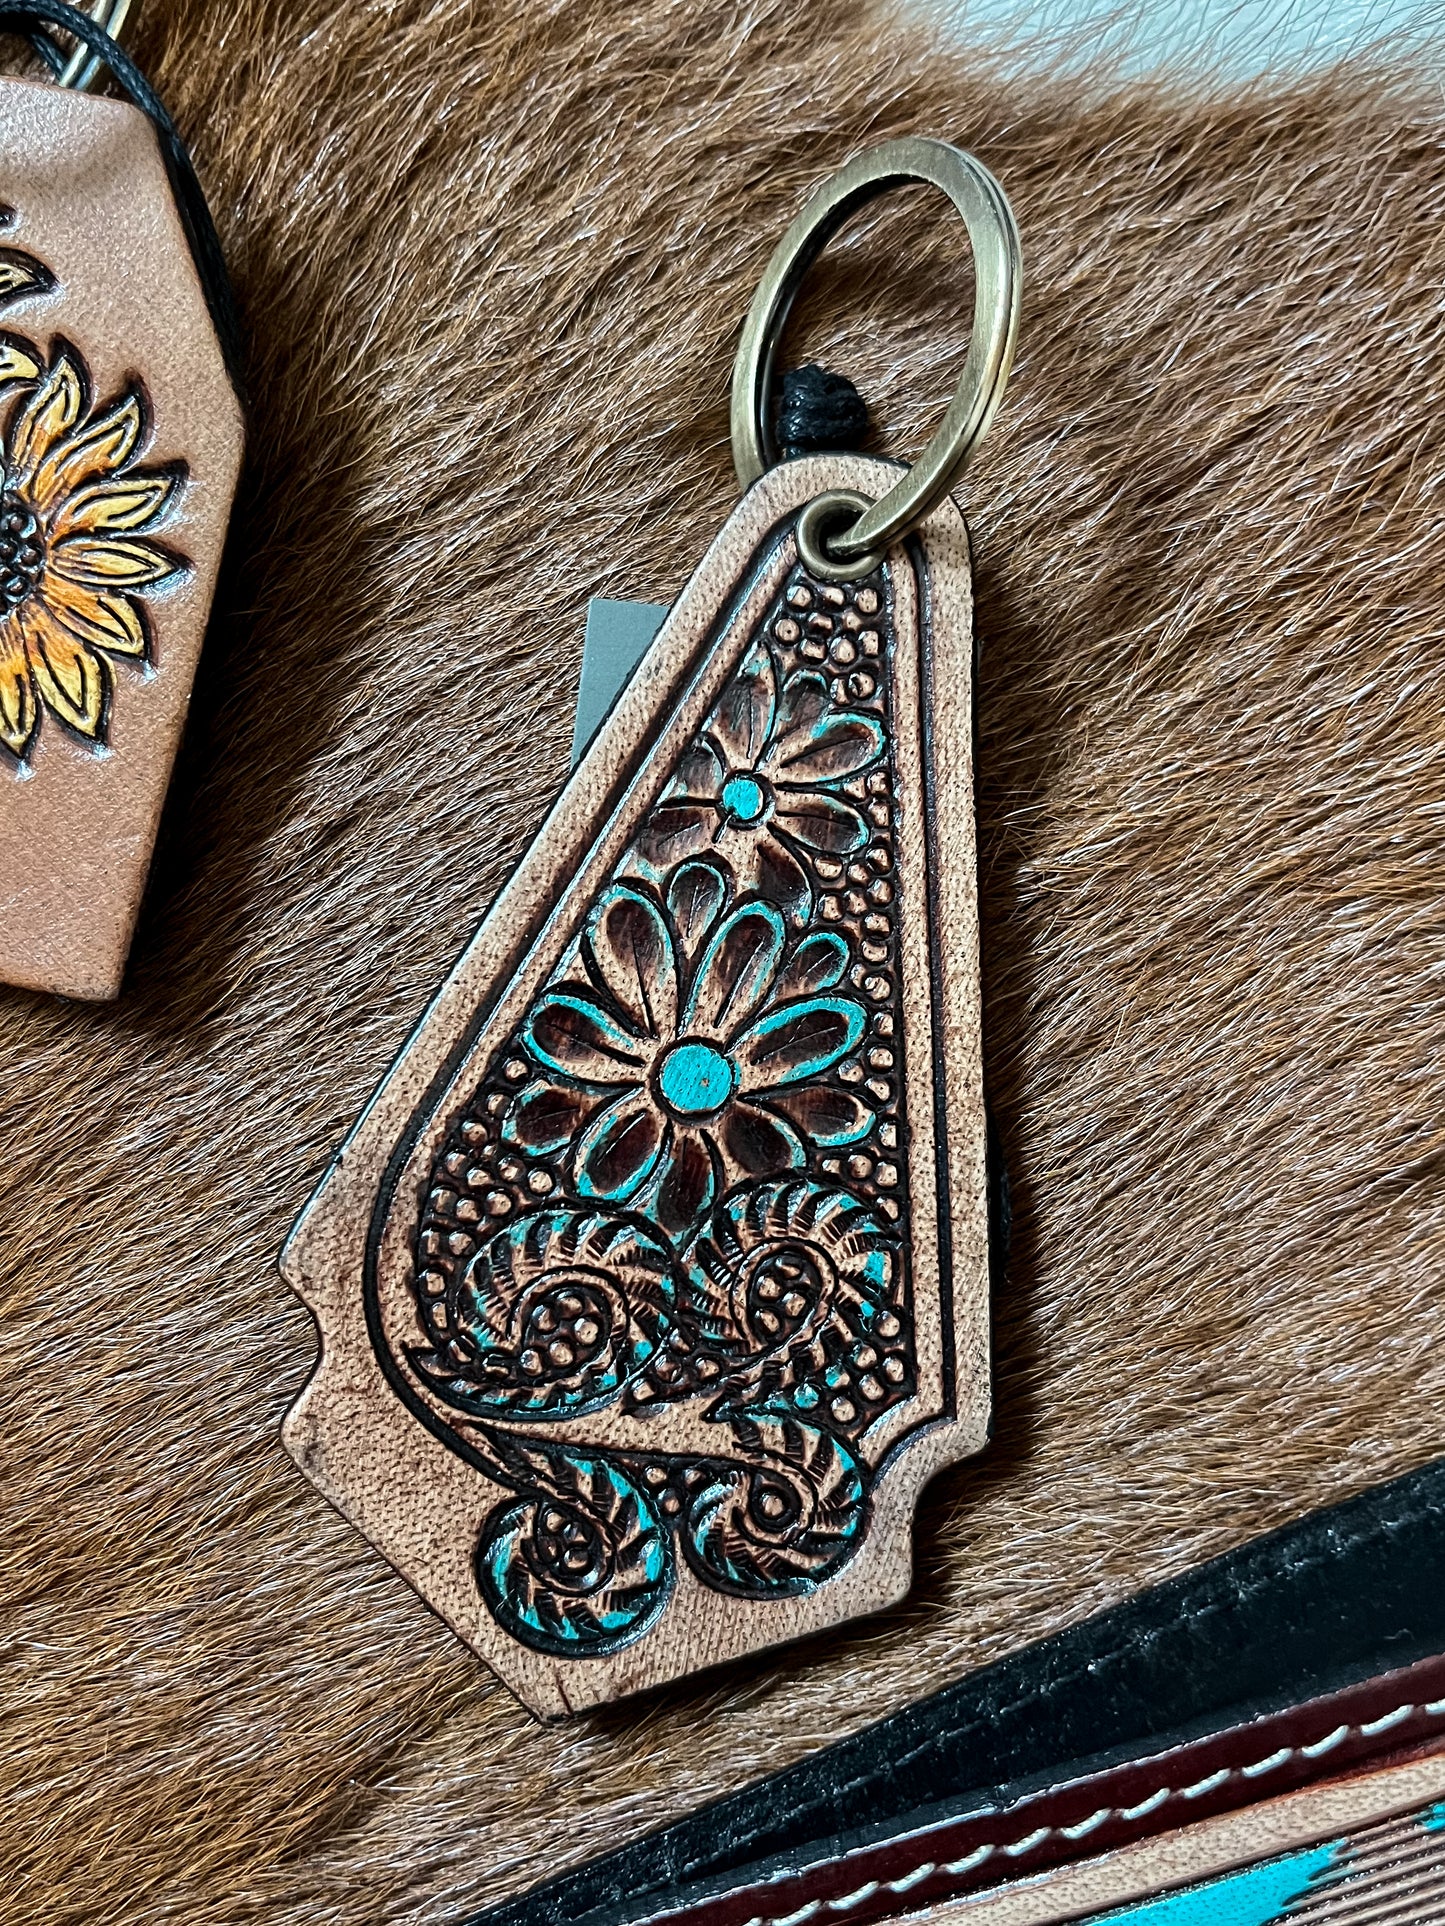 The Tooled Leather Keychains